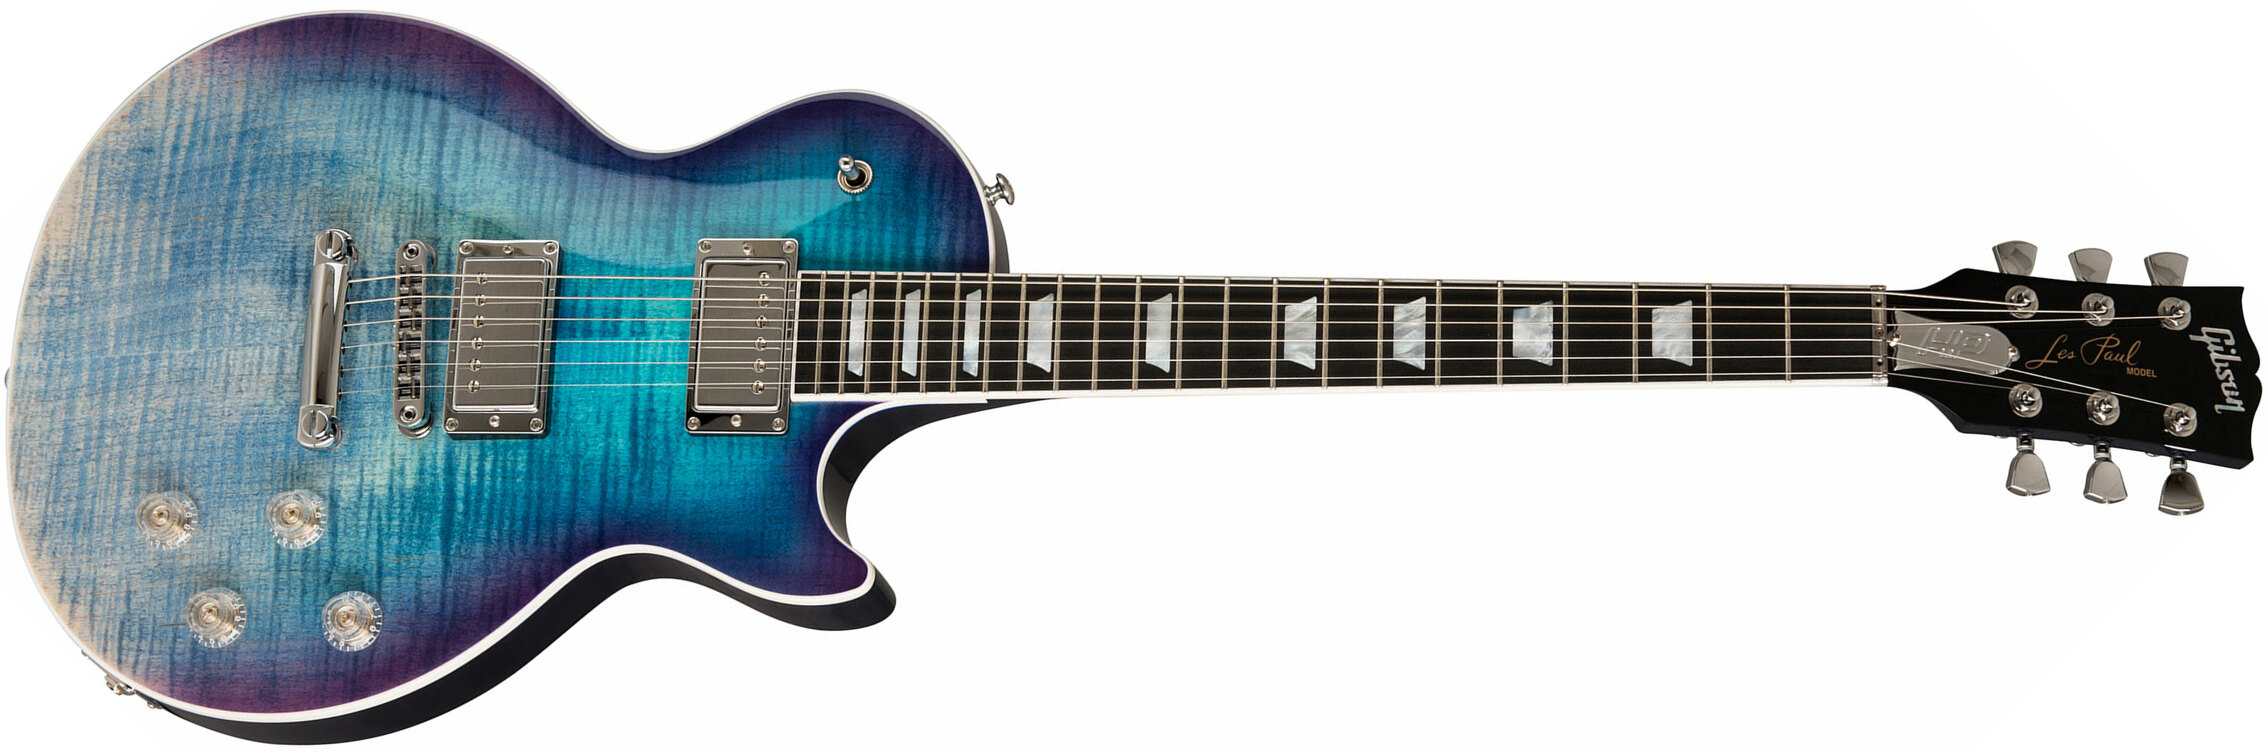 Gibson Les Paul Hp-ii High Performance 2019 Hh Ht Rw - Blueberry Fade - Single cut electric guitar - Main picture